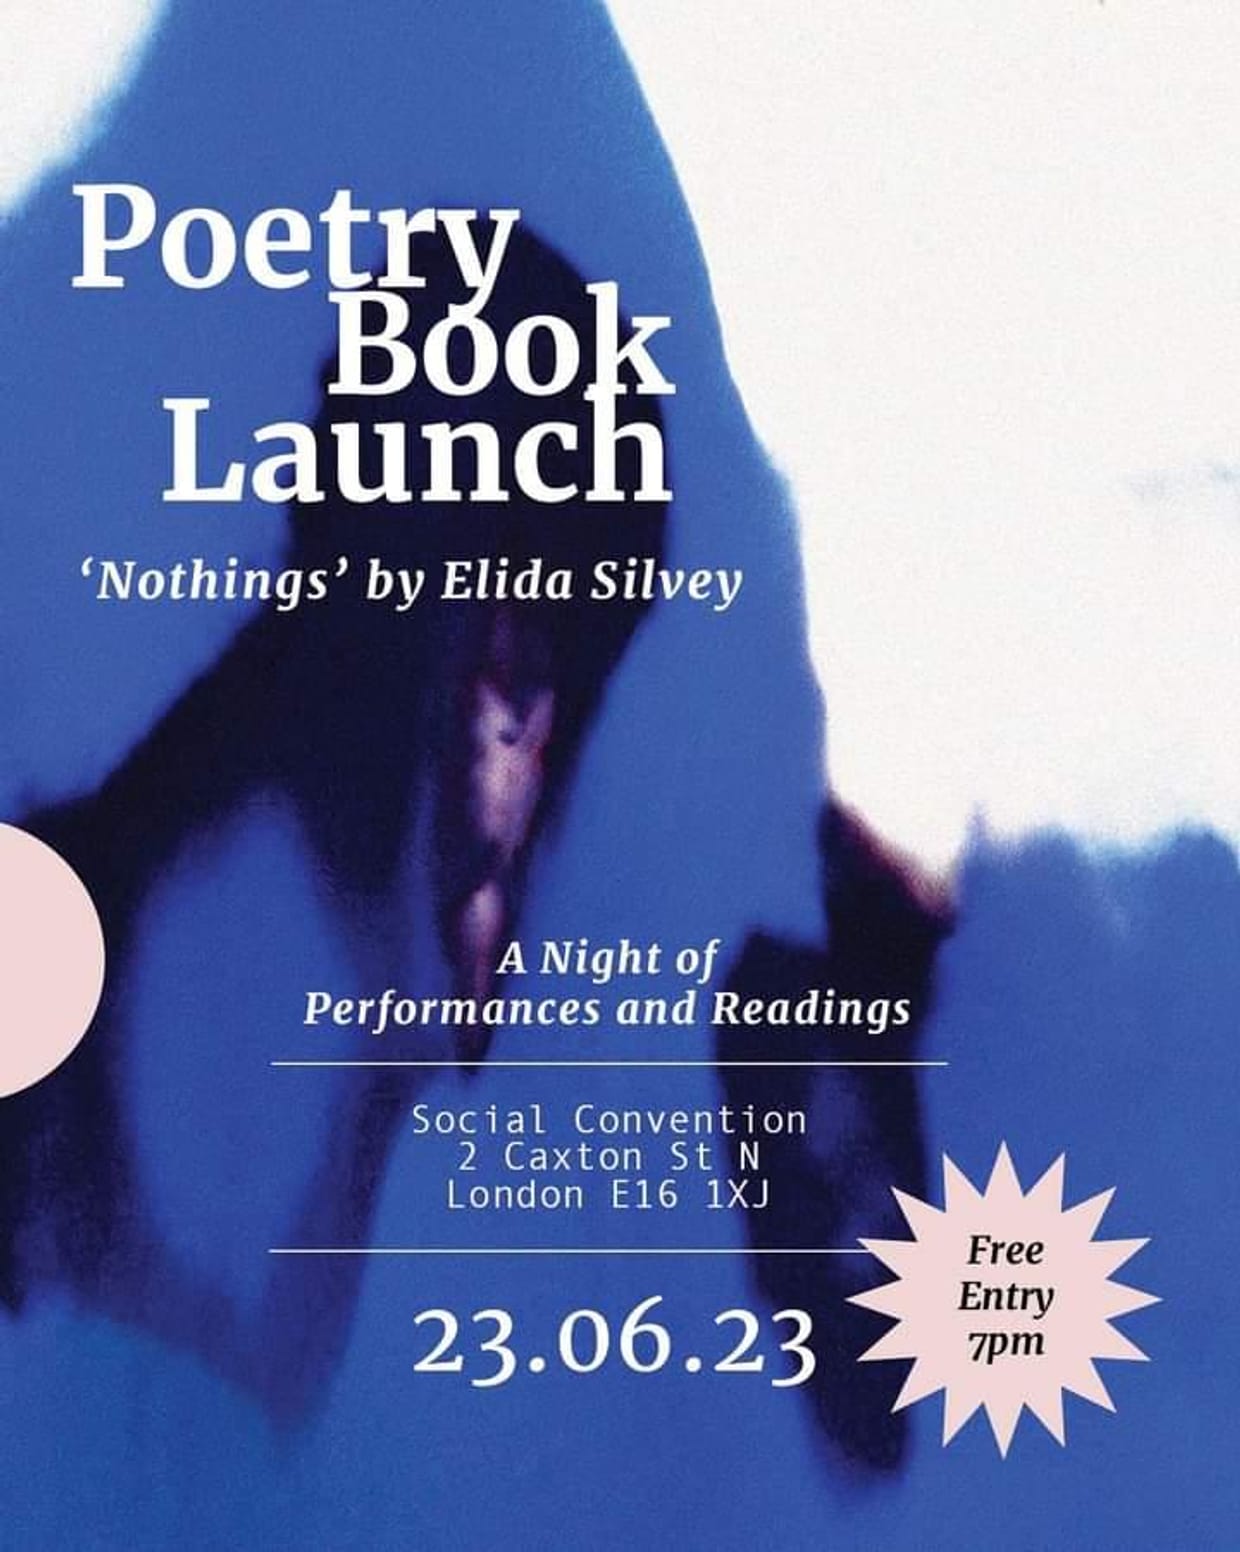 Poetry Book Launch: Elida Silvey 'Nothings'